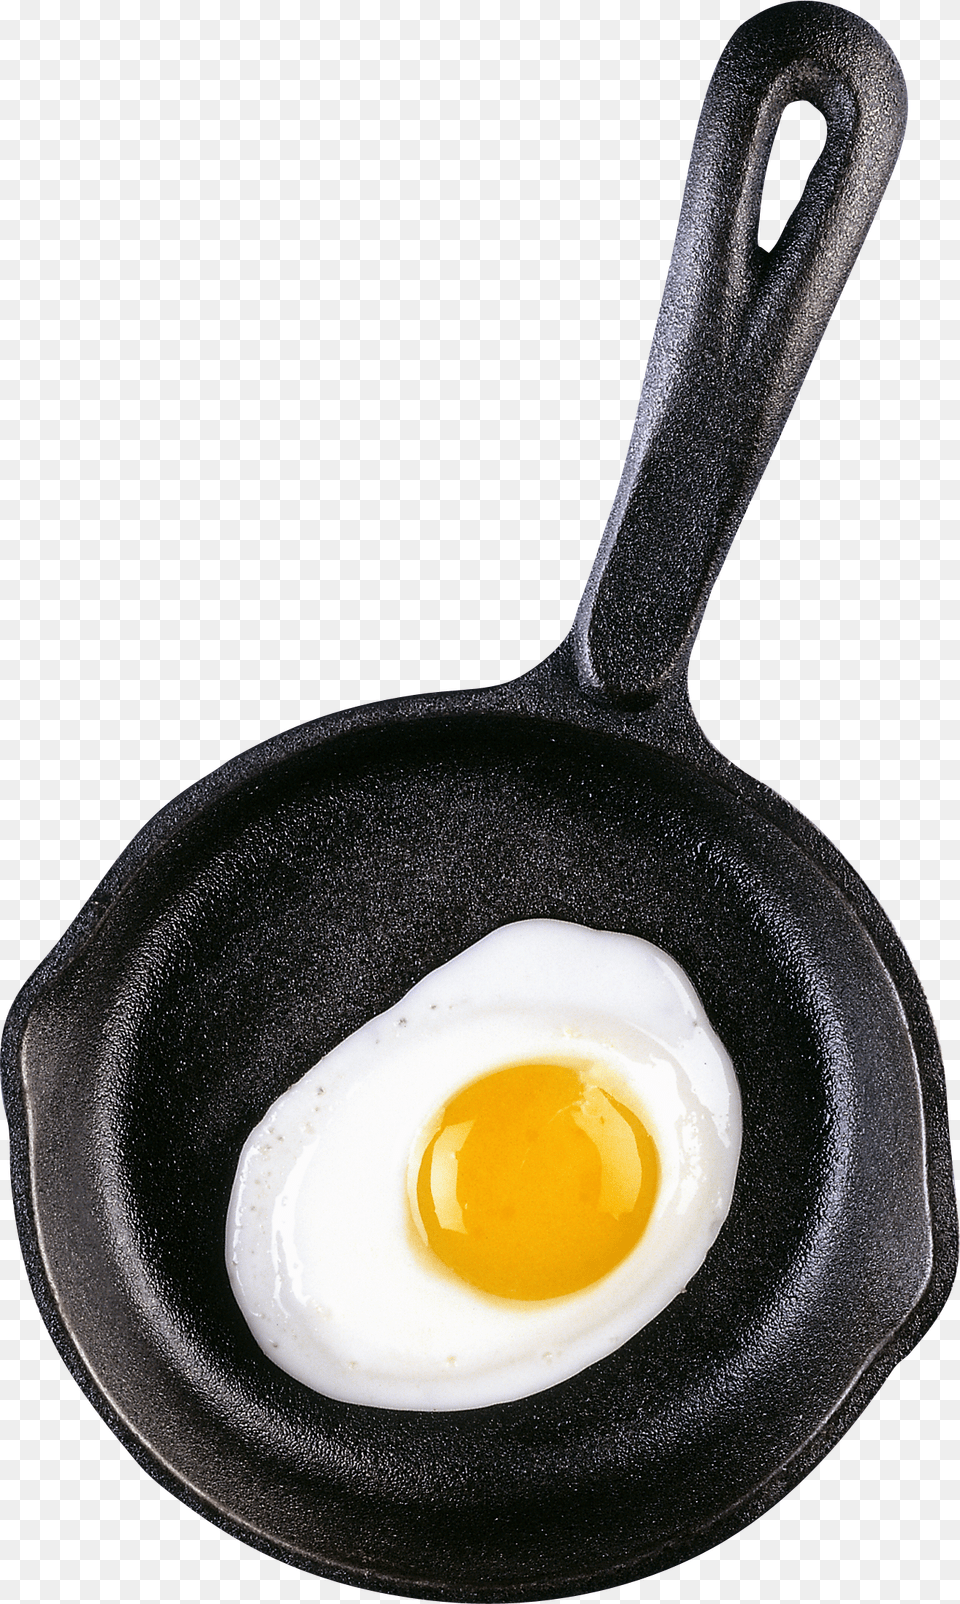 Frying Pan Image Fried Egg In A Pan Clipart, Cooking Pan, Cookware, Food, Frying Pan Free Png